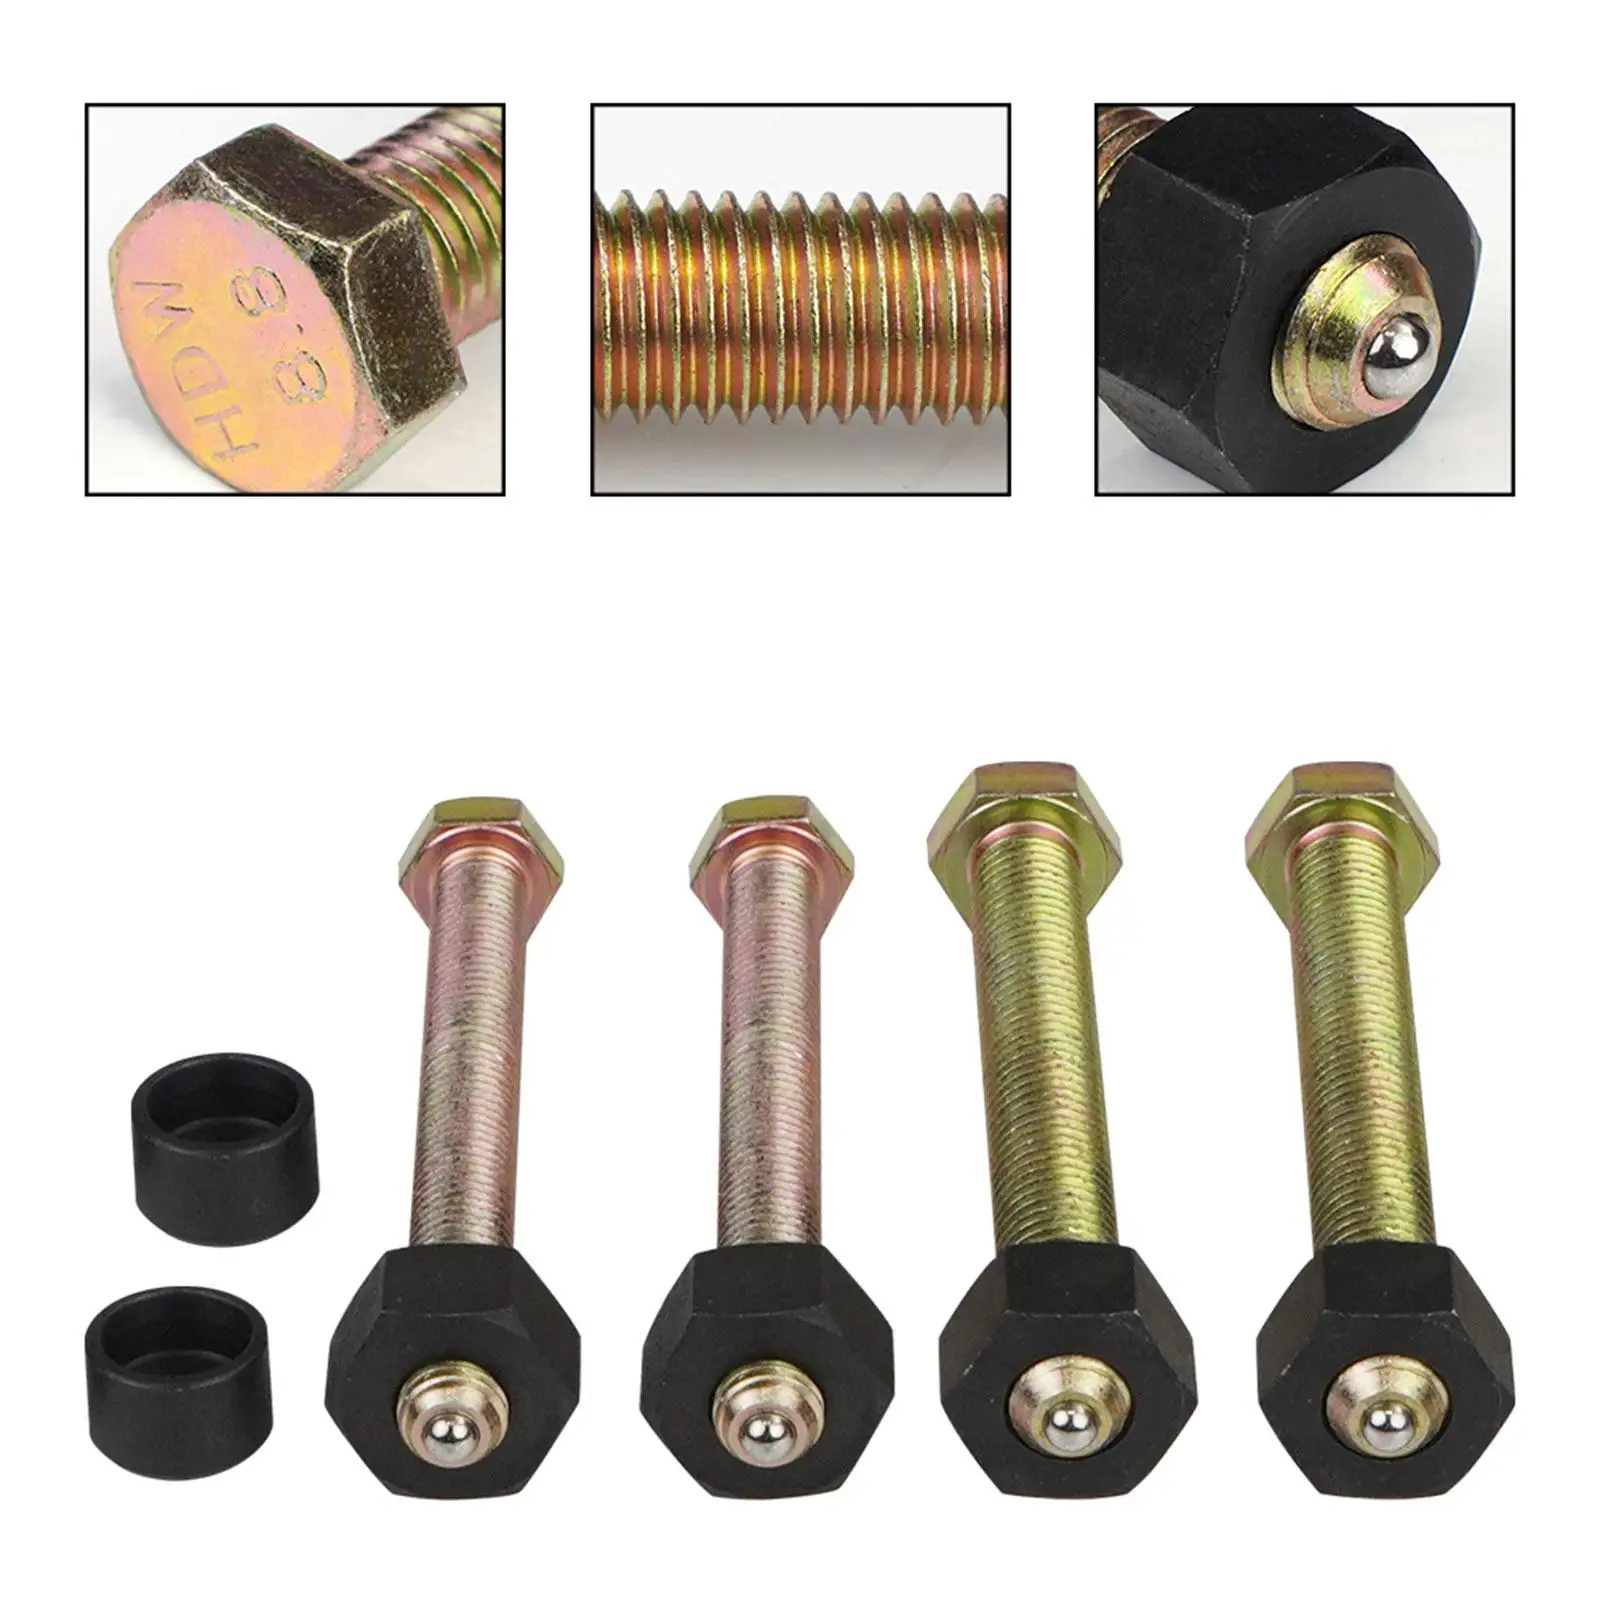 Impact Rated Hub Removal Bolt Set 78834 Accessories Easy to Install Replacement 3/4 inch 15/16 inch Threaded Rod Pneumatic Tools